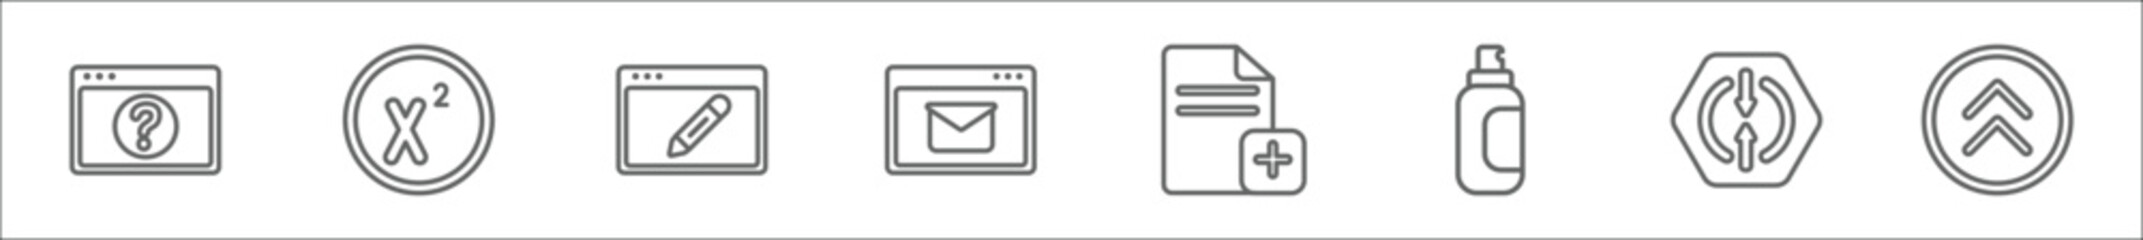 outline set of user interface line icons. linear vector icons such as question button, superscript, gross pencil, postal, new page, spray paint, opposition, top arrows